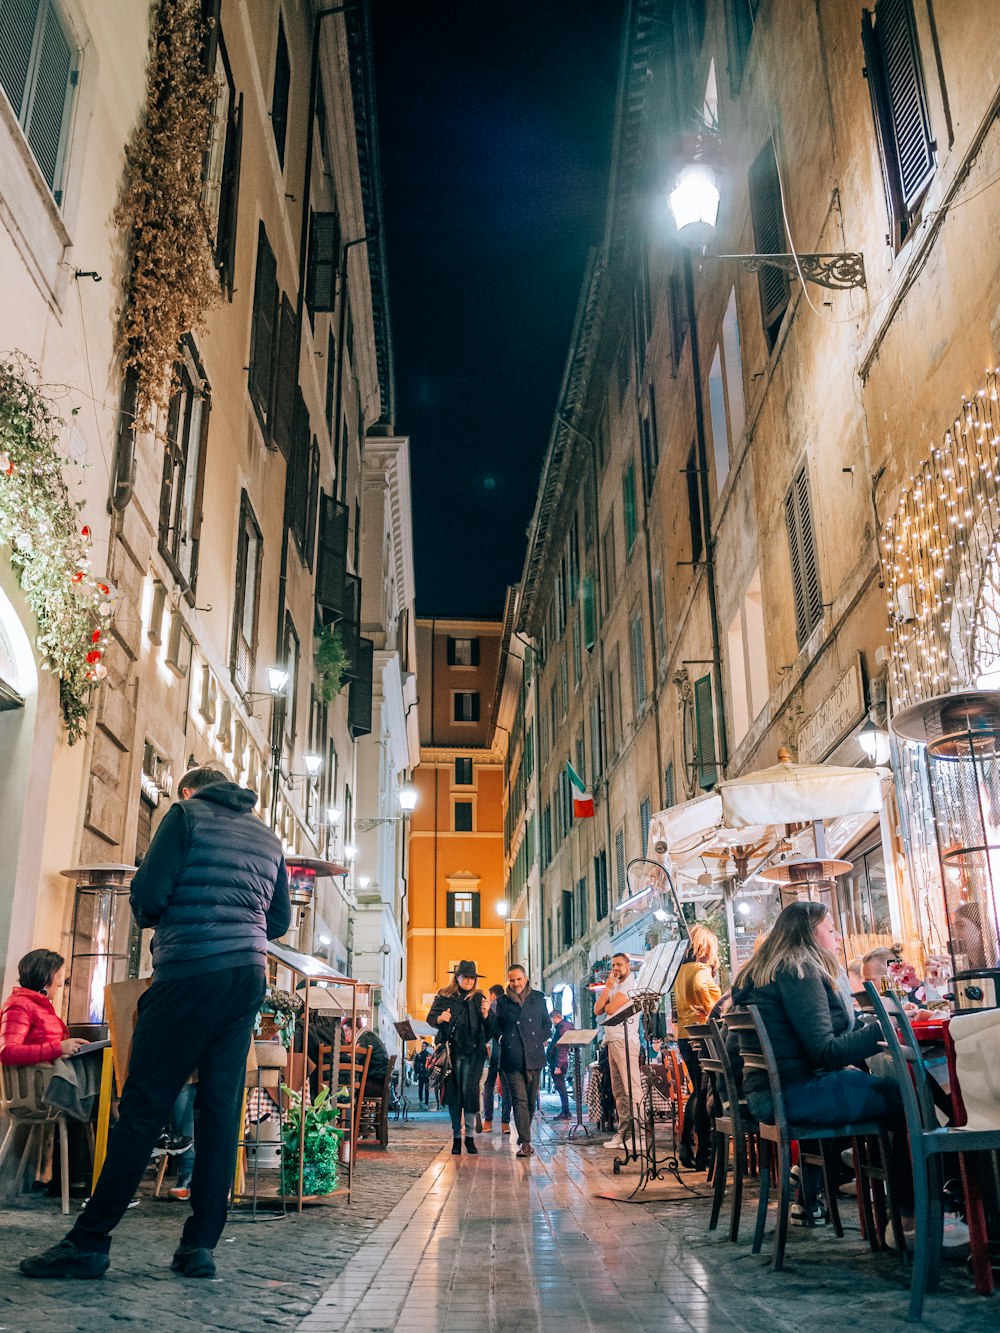 a narrow city street at night with people sitting at tables